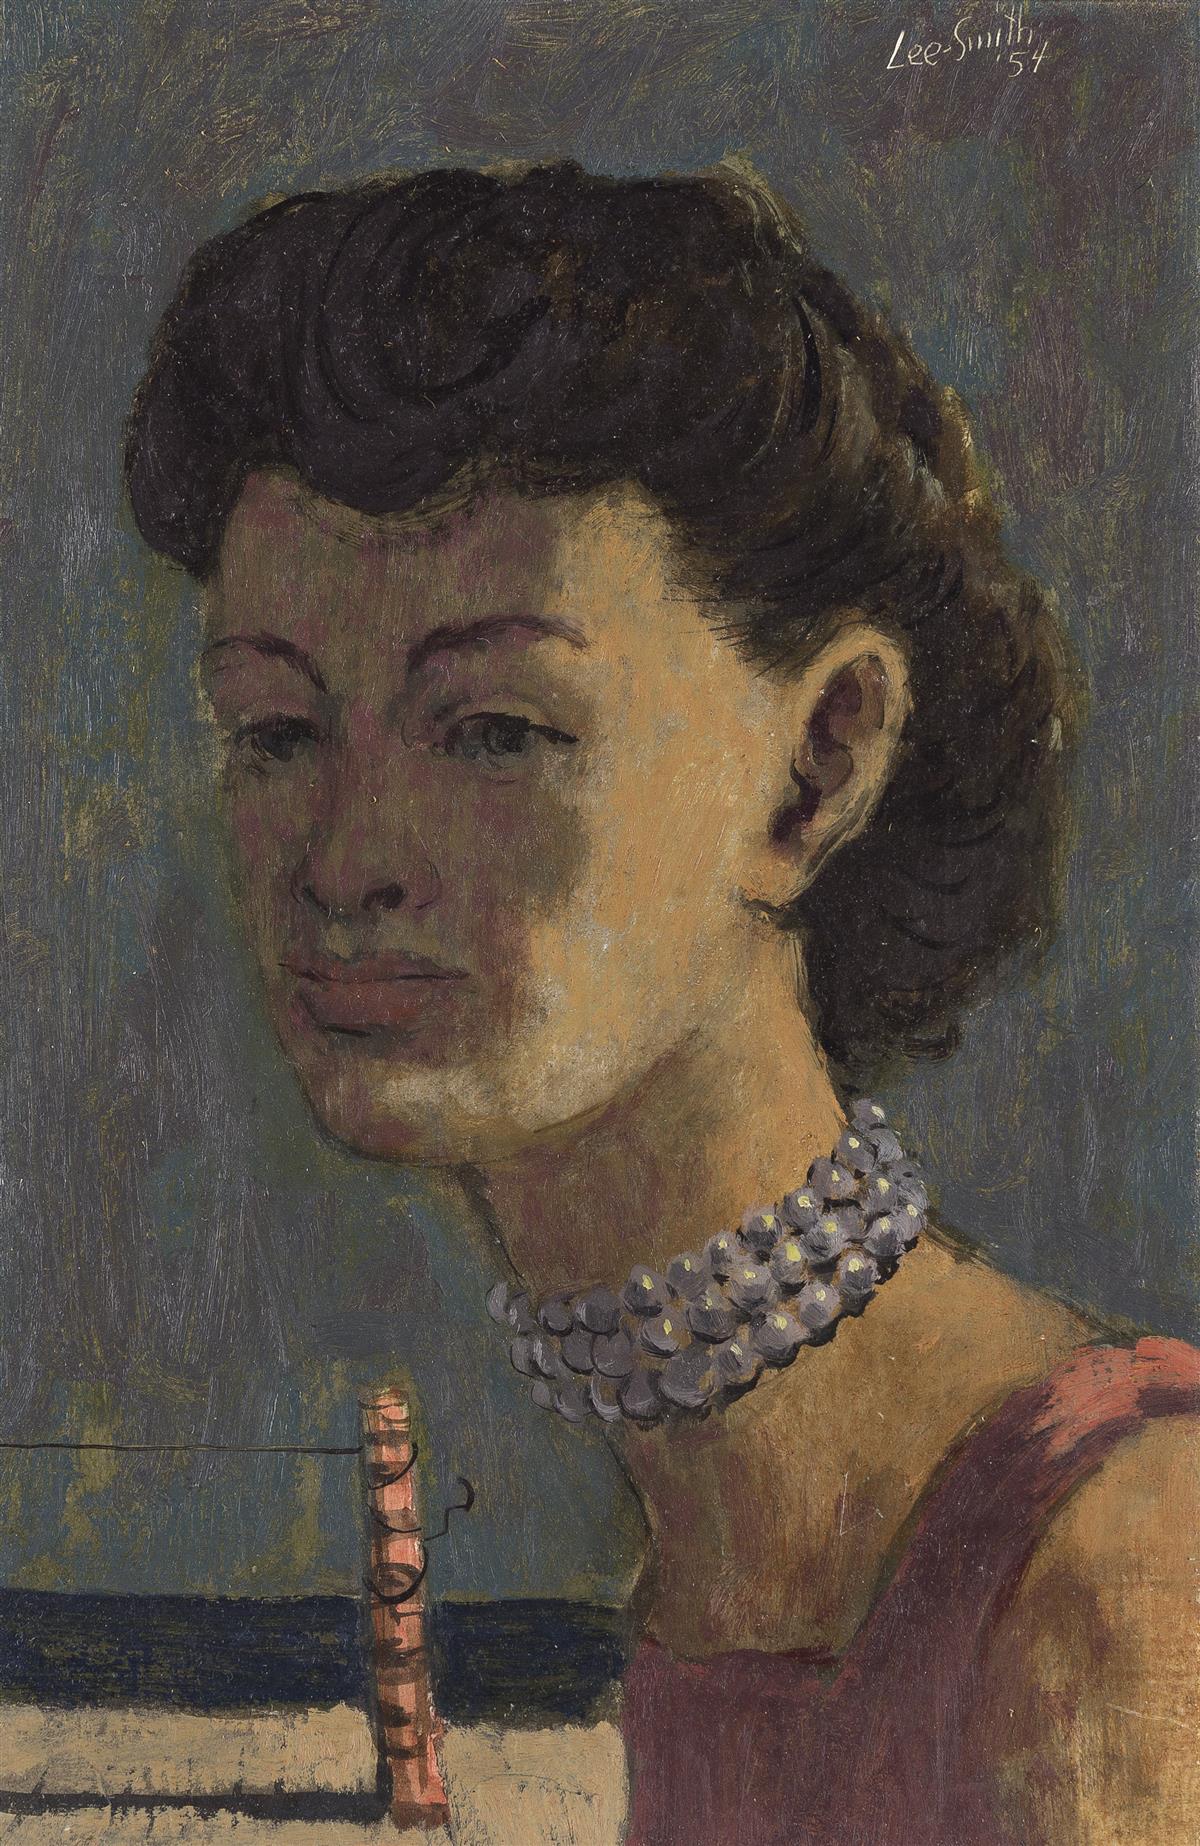 HUGHIE LEE-SMITH (1915 - 1999) Untitled (Woman with Pearl Choker).